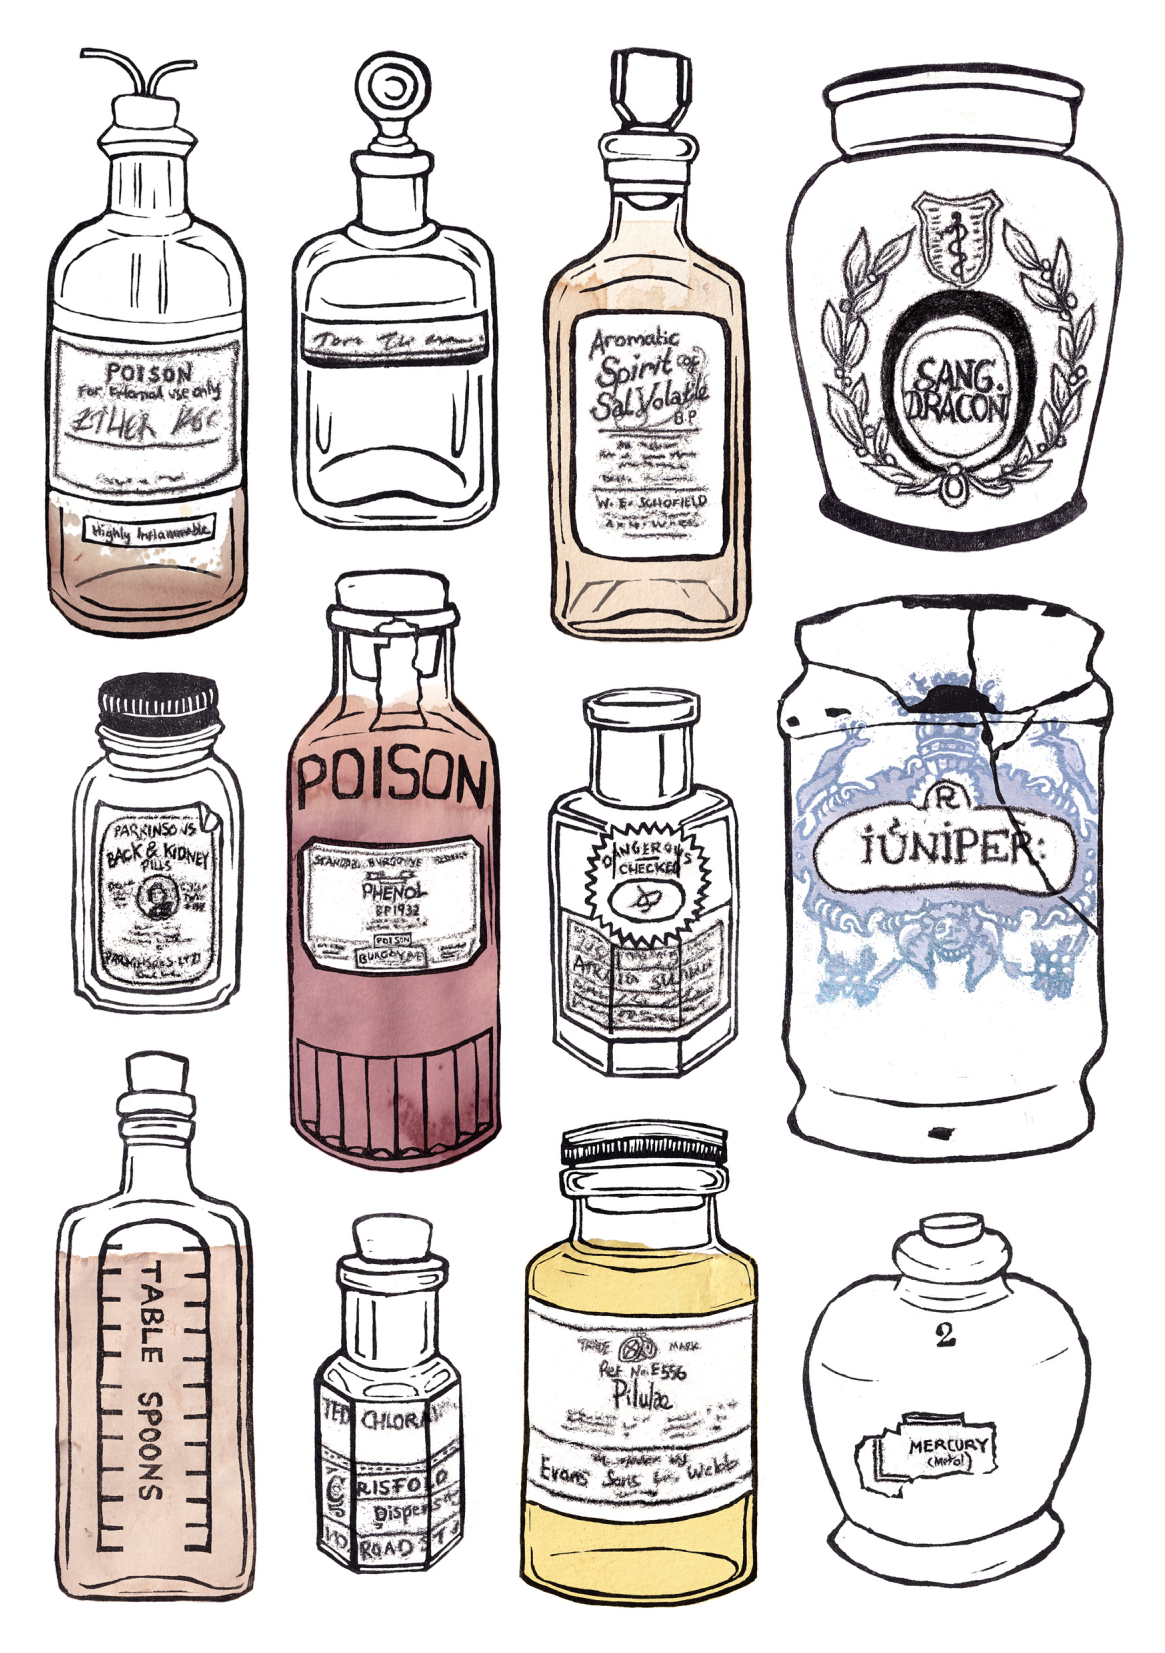 A selection of lino printed apothecary bottles, some partially filled with light coloured liquids, on a white background.